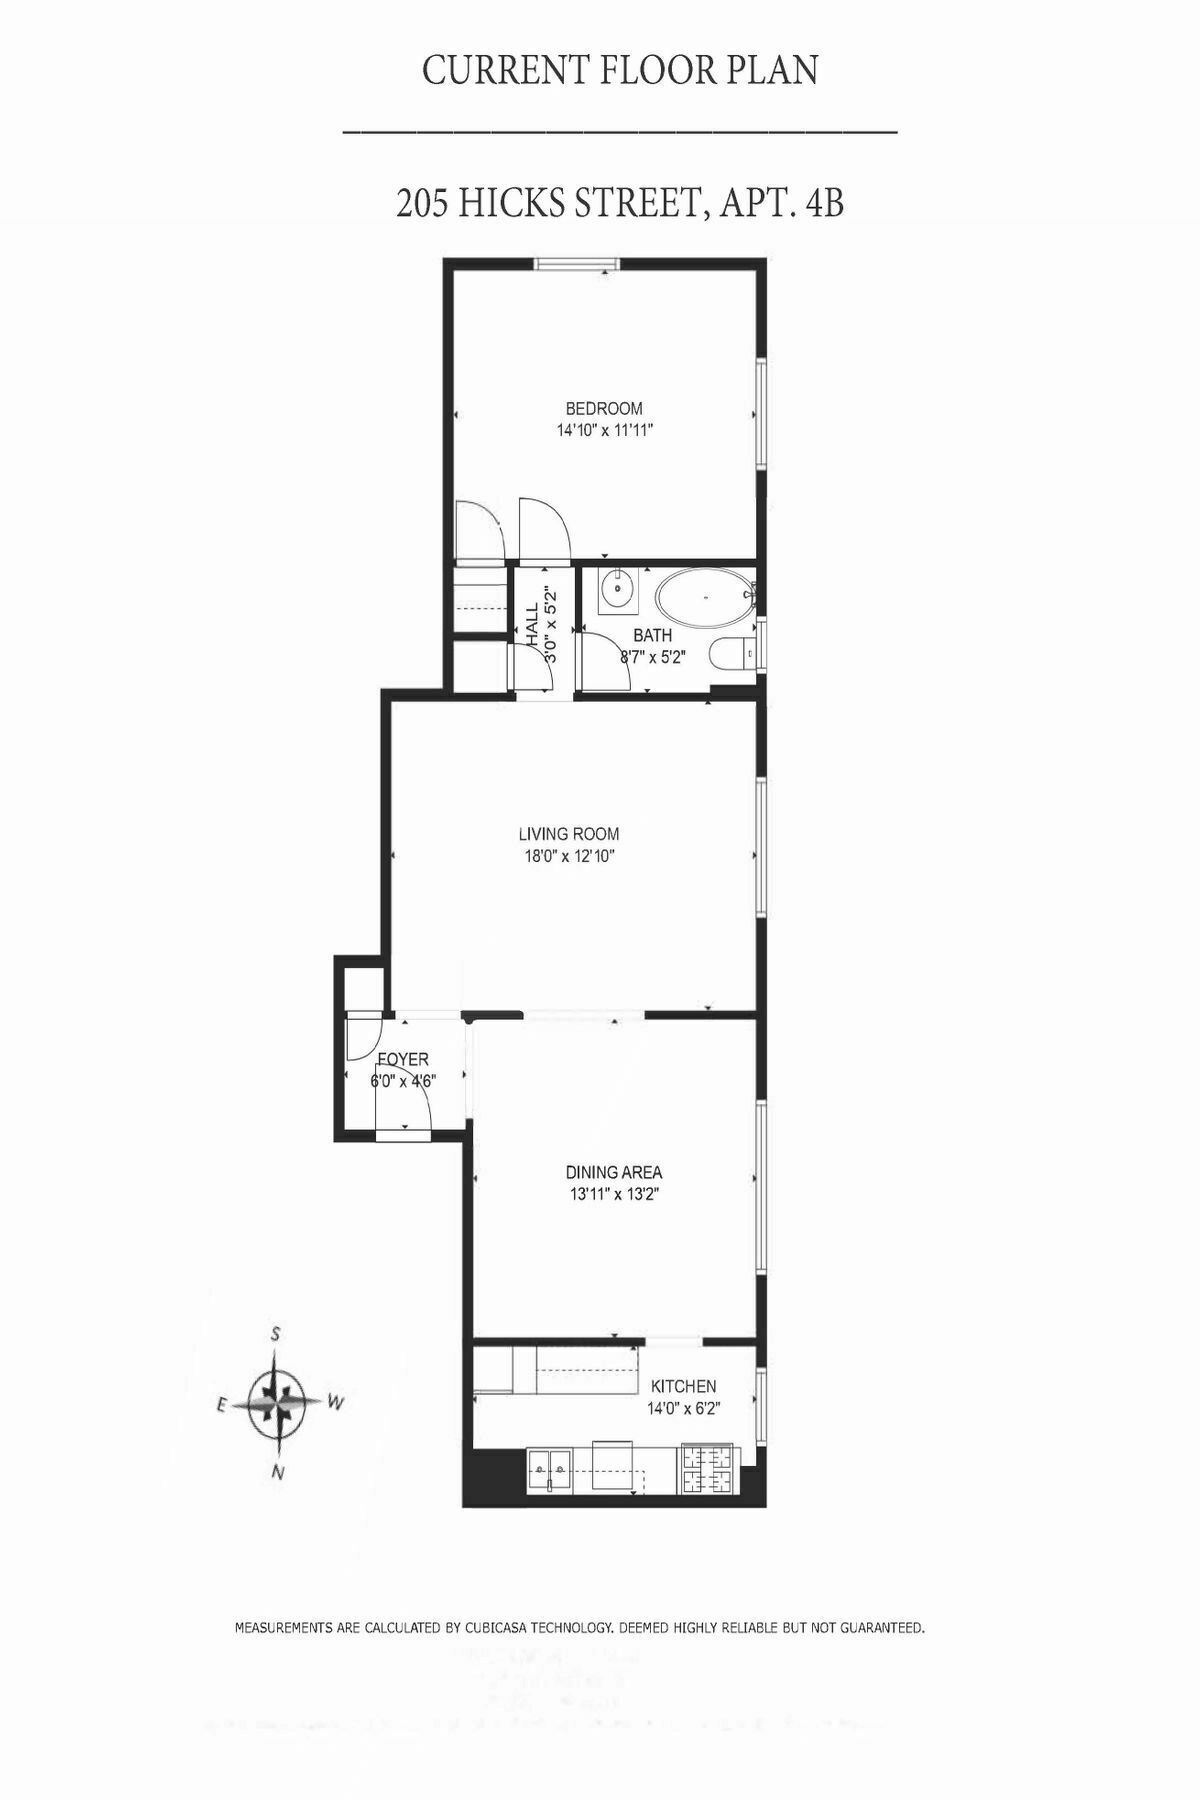 floorplan showing kitchen at one end and bedroom at other and three closets